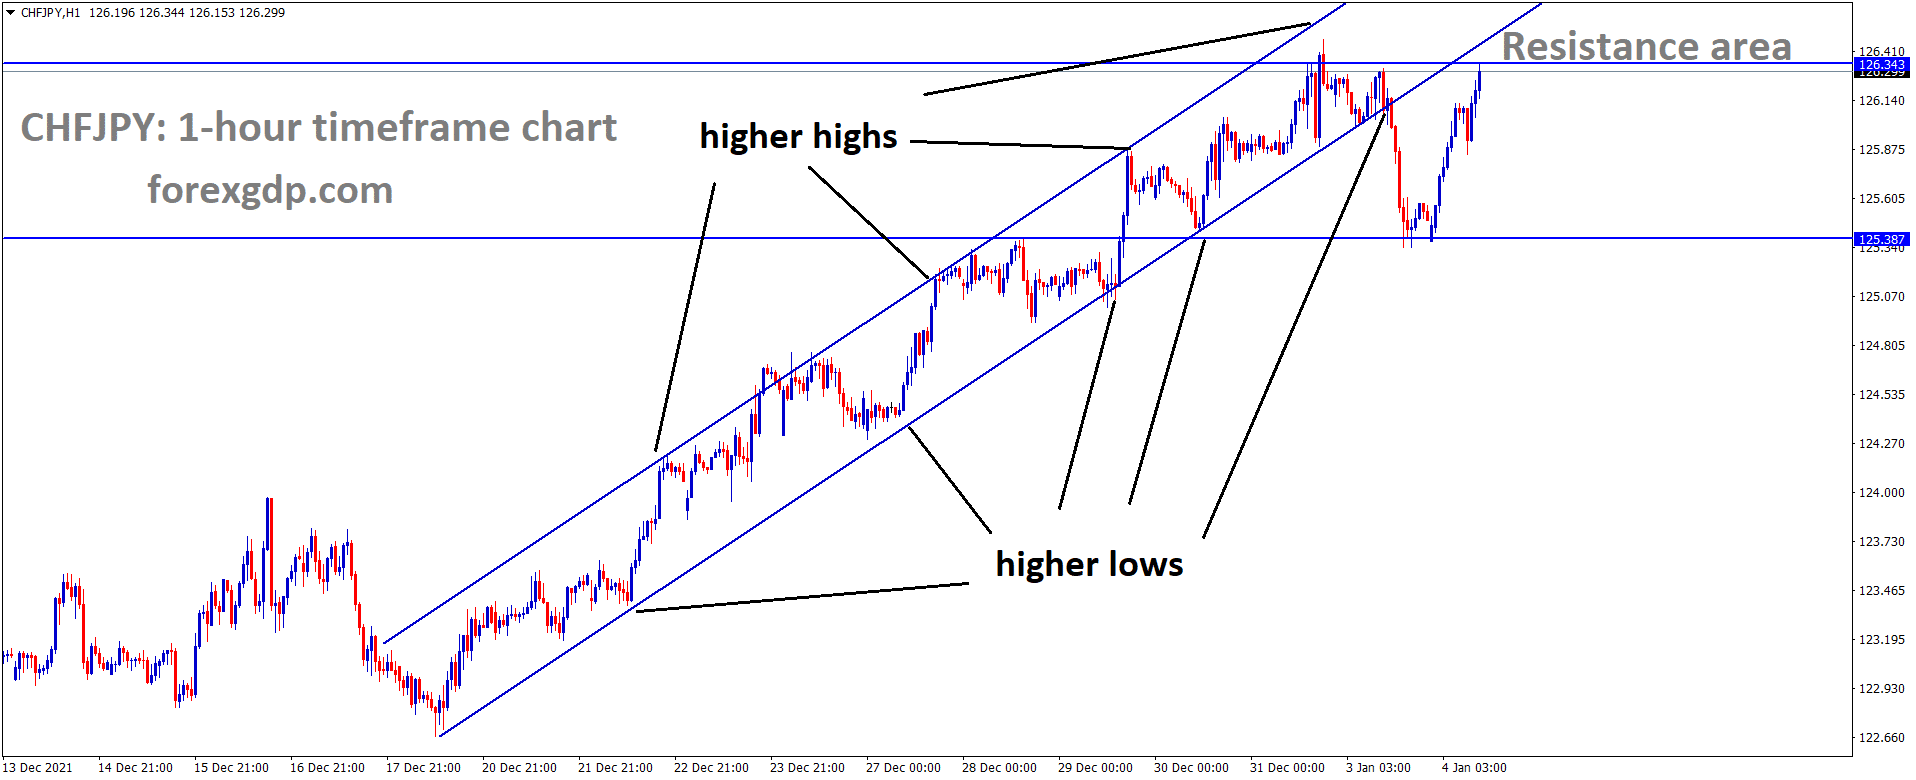 CHFJPY is moving in an Ascending channel and the market has reached the Horizontal resistance area of the Box Pattern.